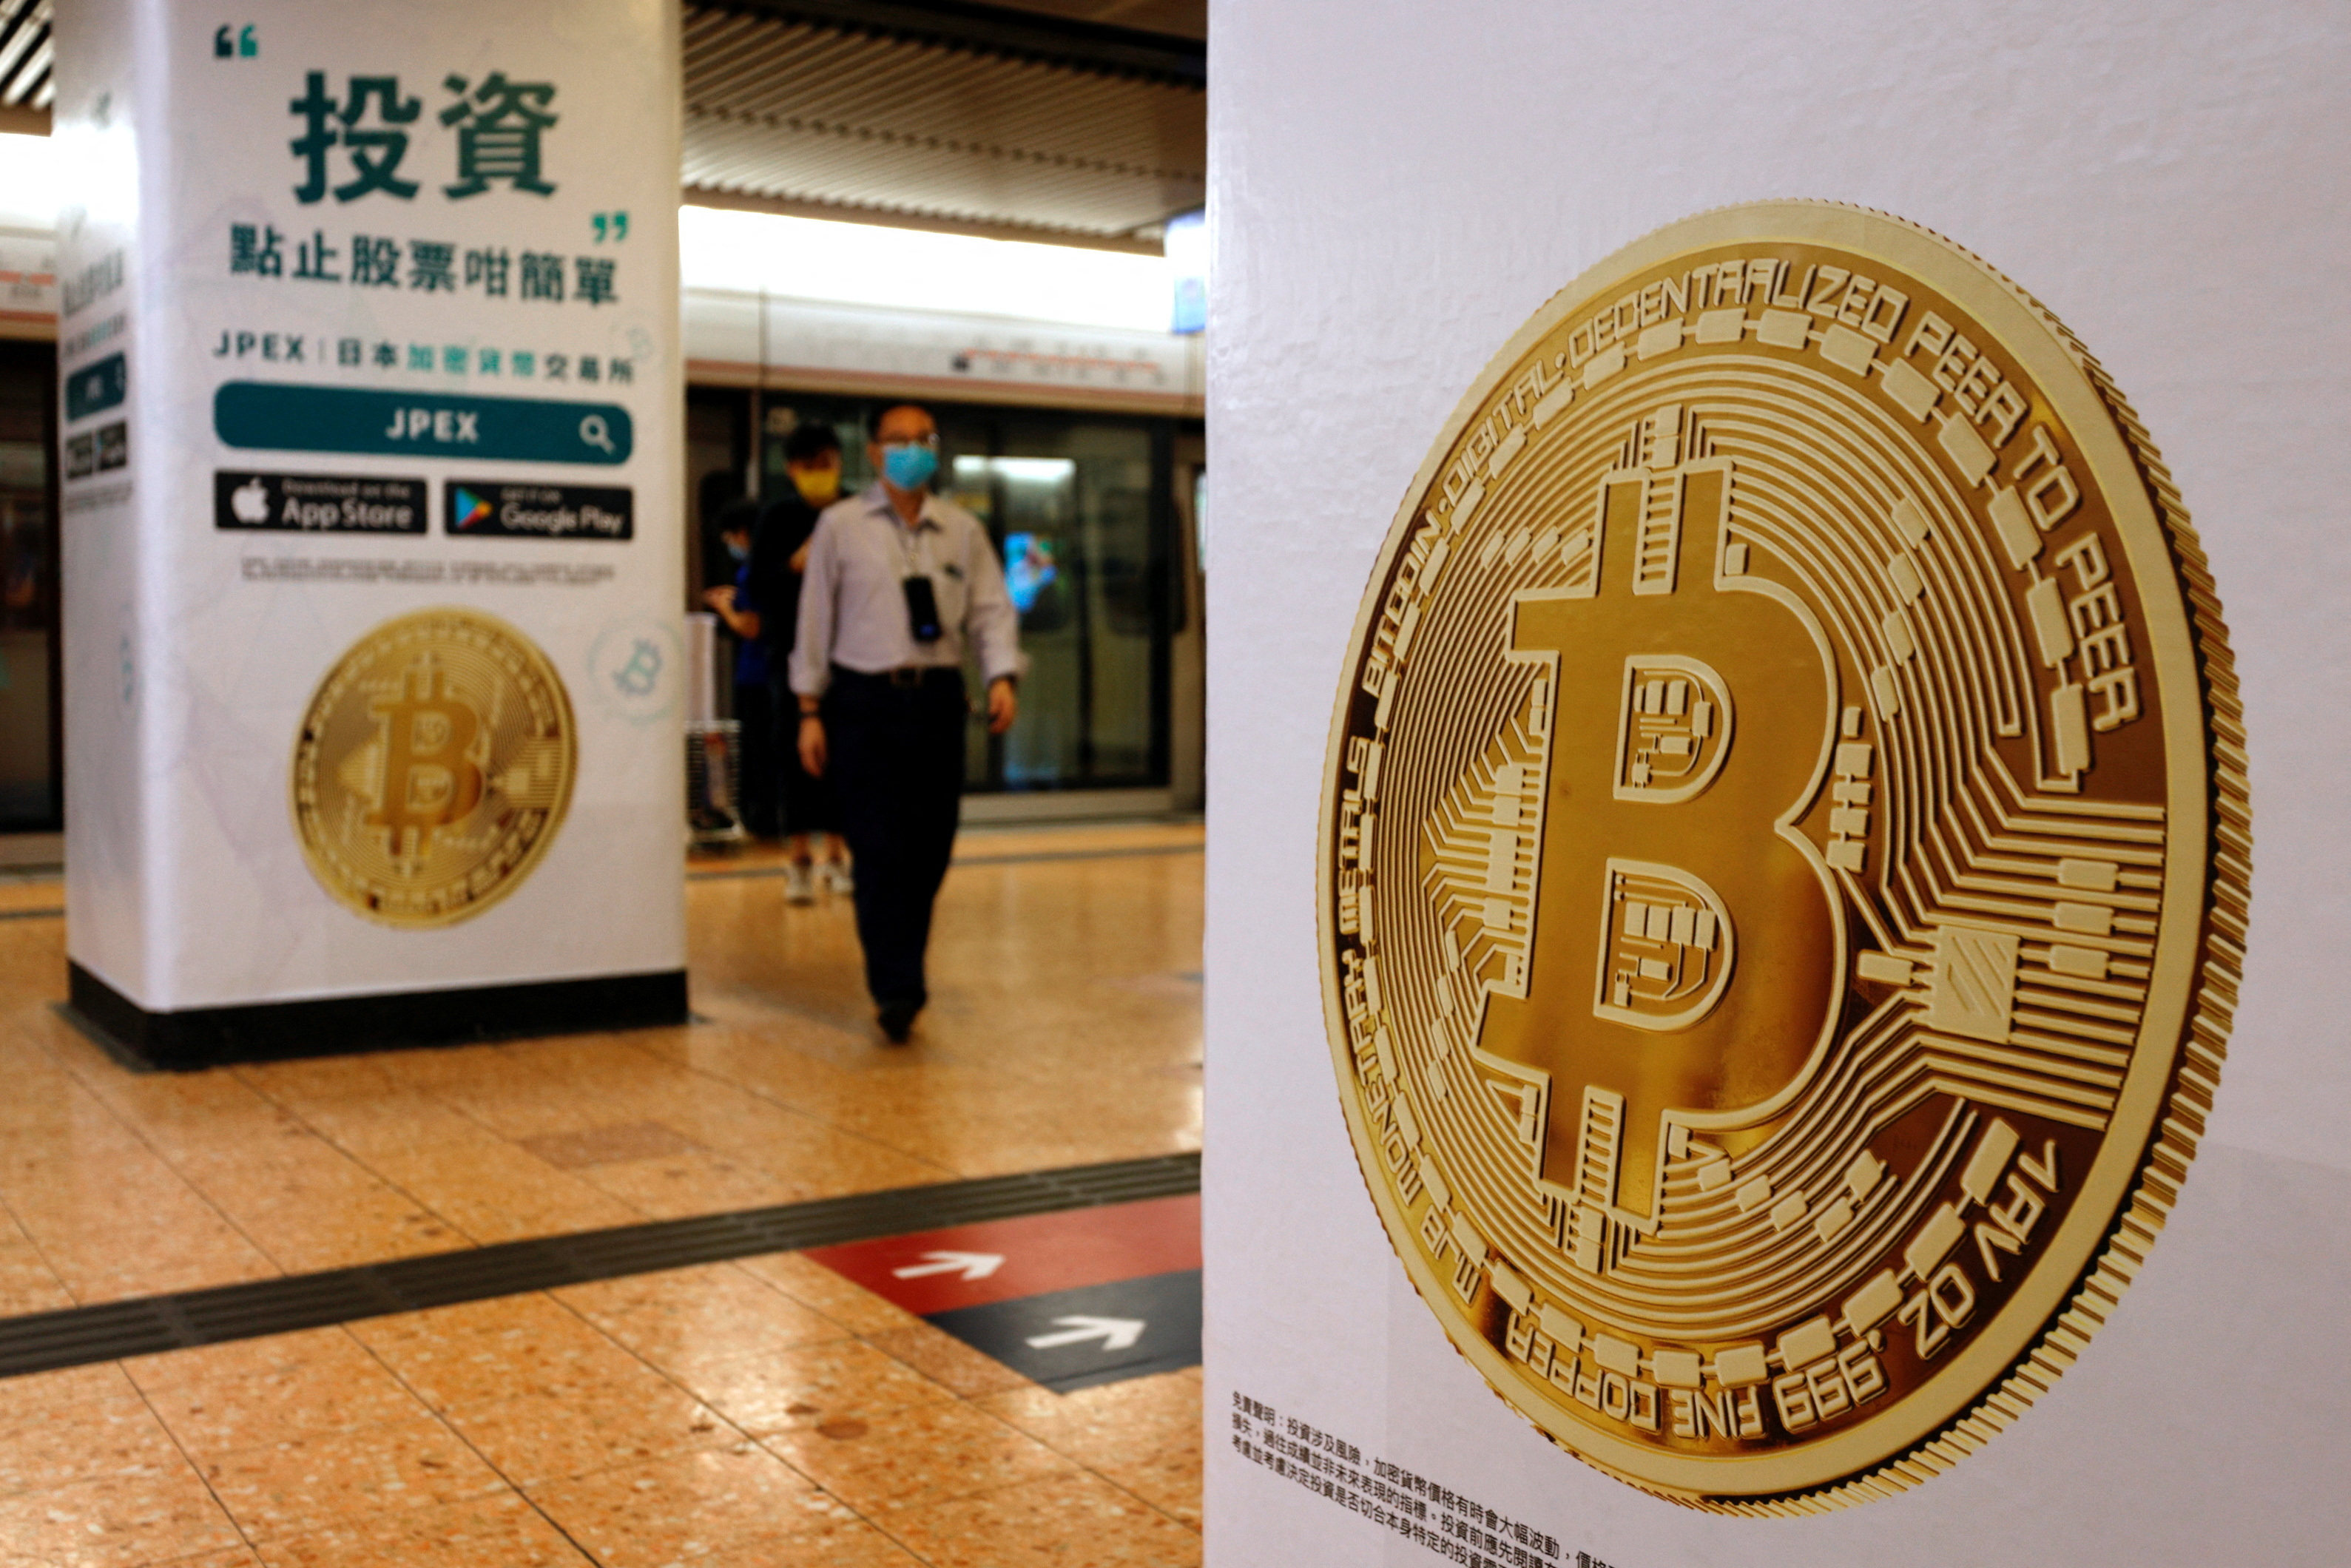 Advertisements for crypto exchange show a Bitcoin symbol at a Mass Transit Railway (MTR) station in Hong Kong on October 27, 2021. Photo: Reuters